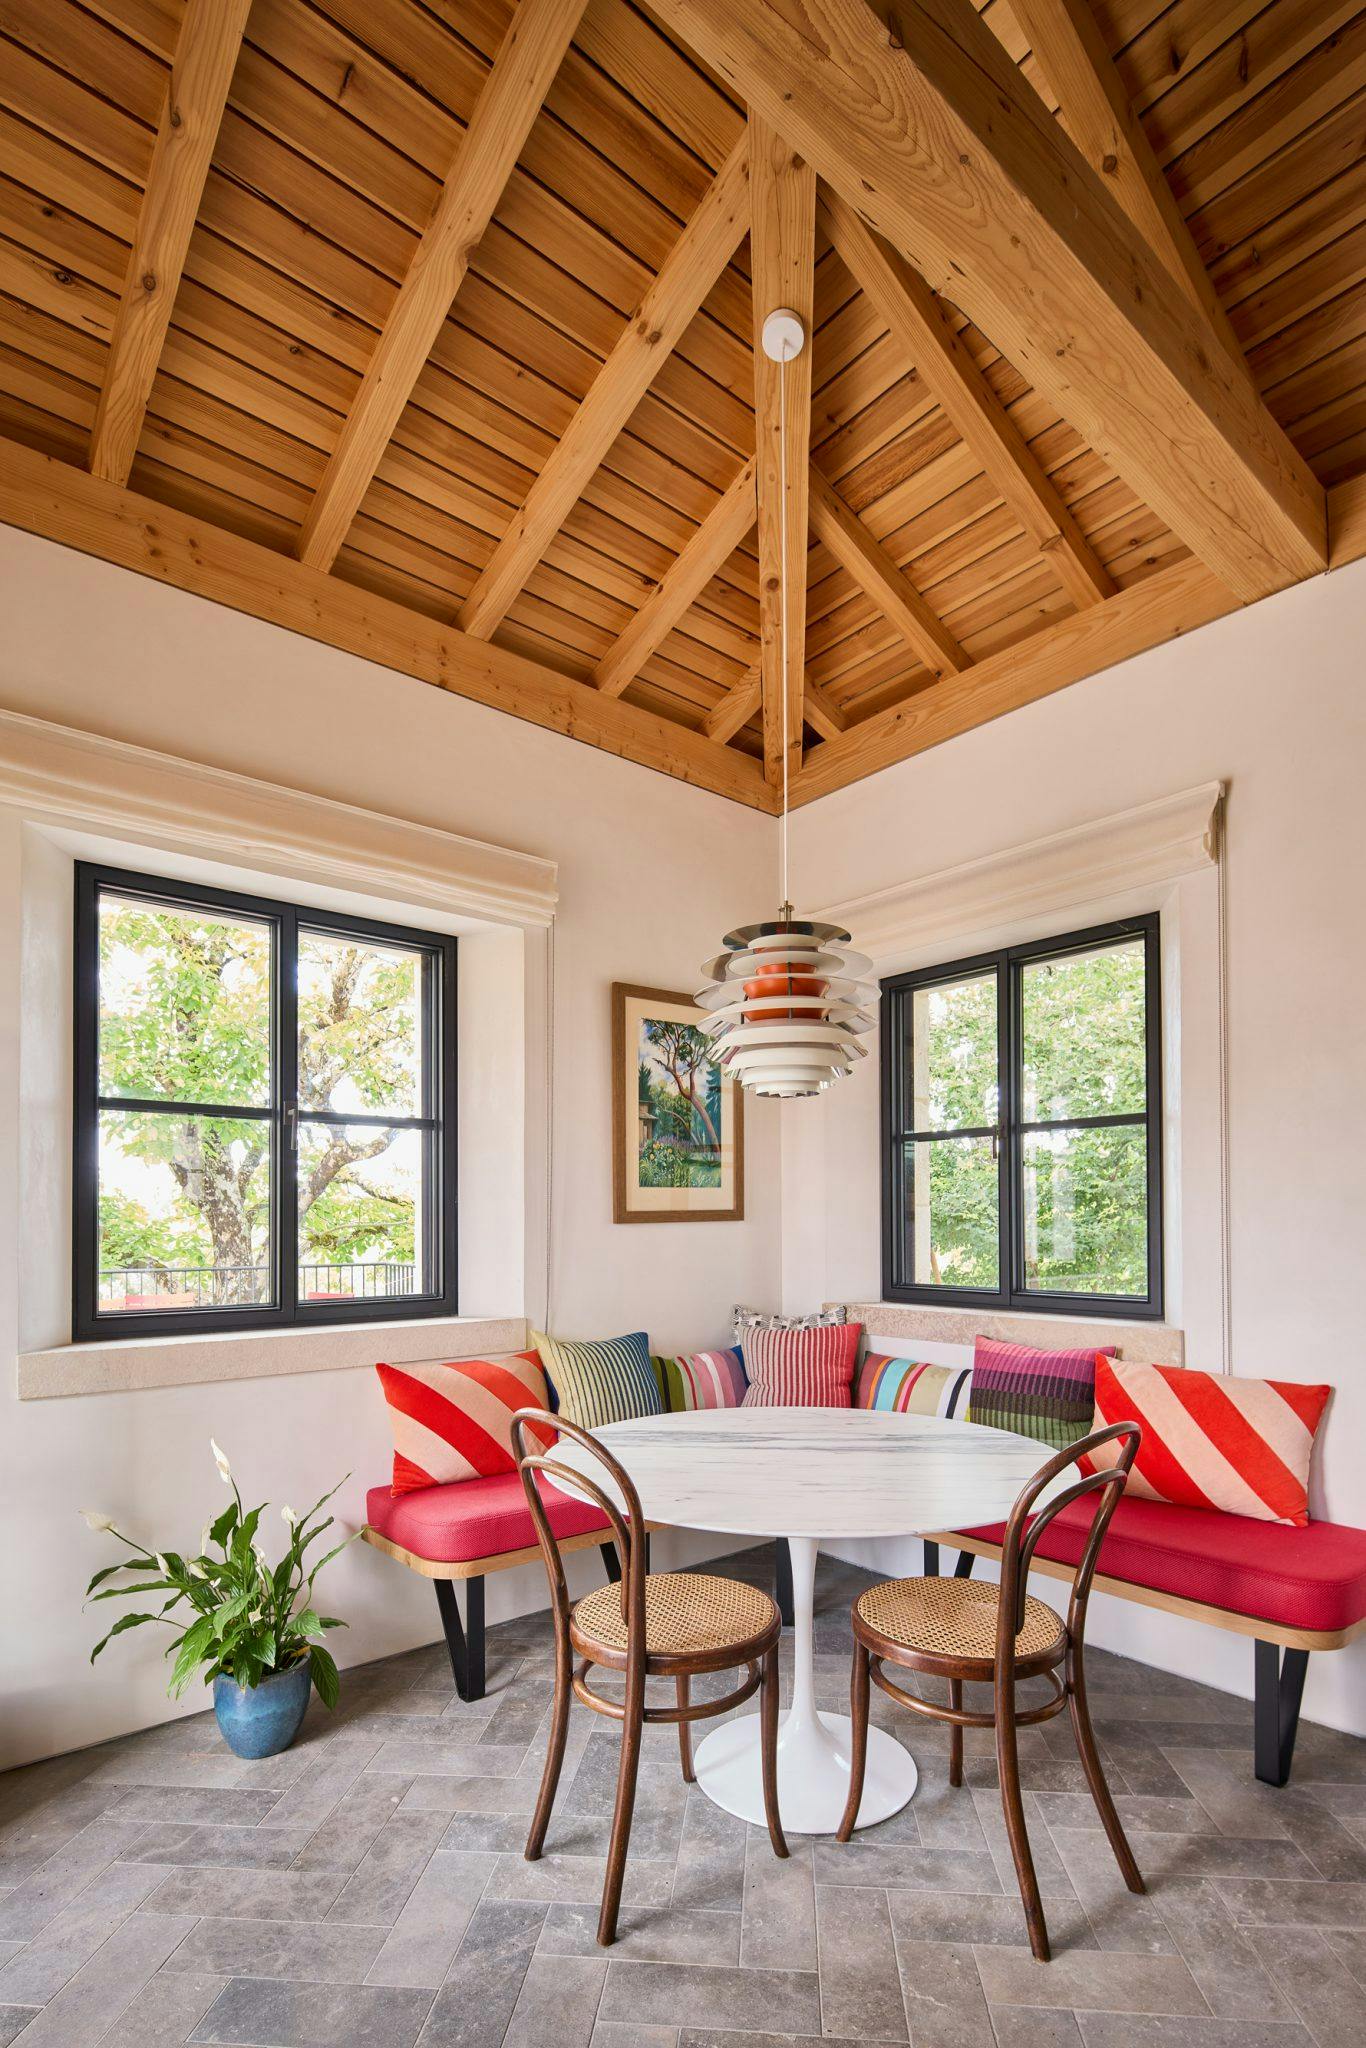 Dining area, high ceiling with wooden beams, benches covered with red cushions